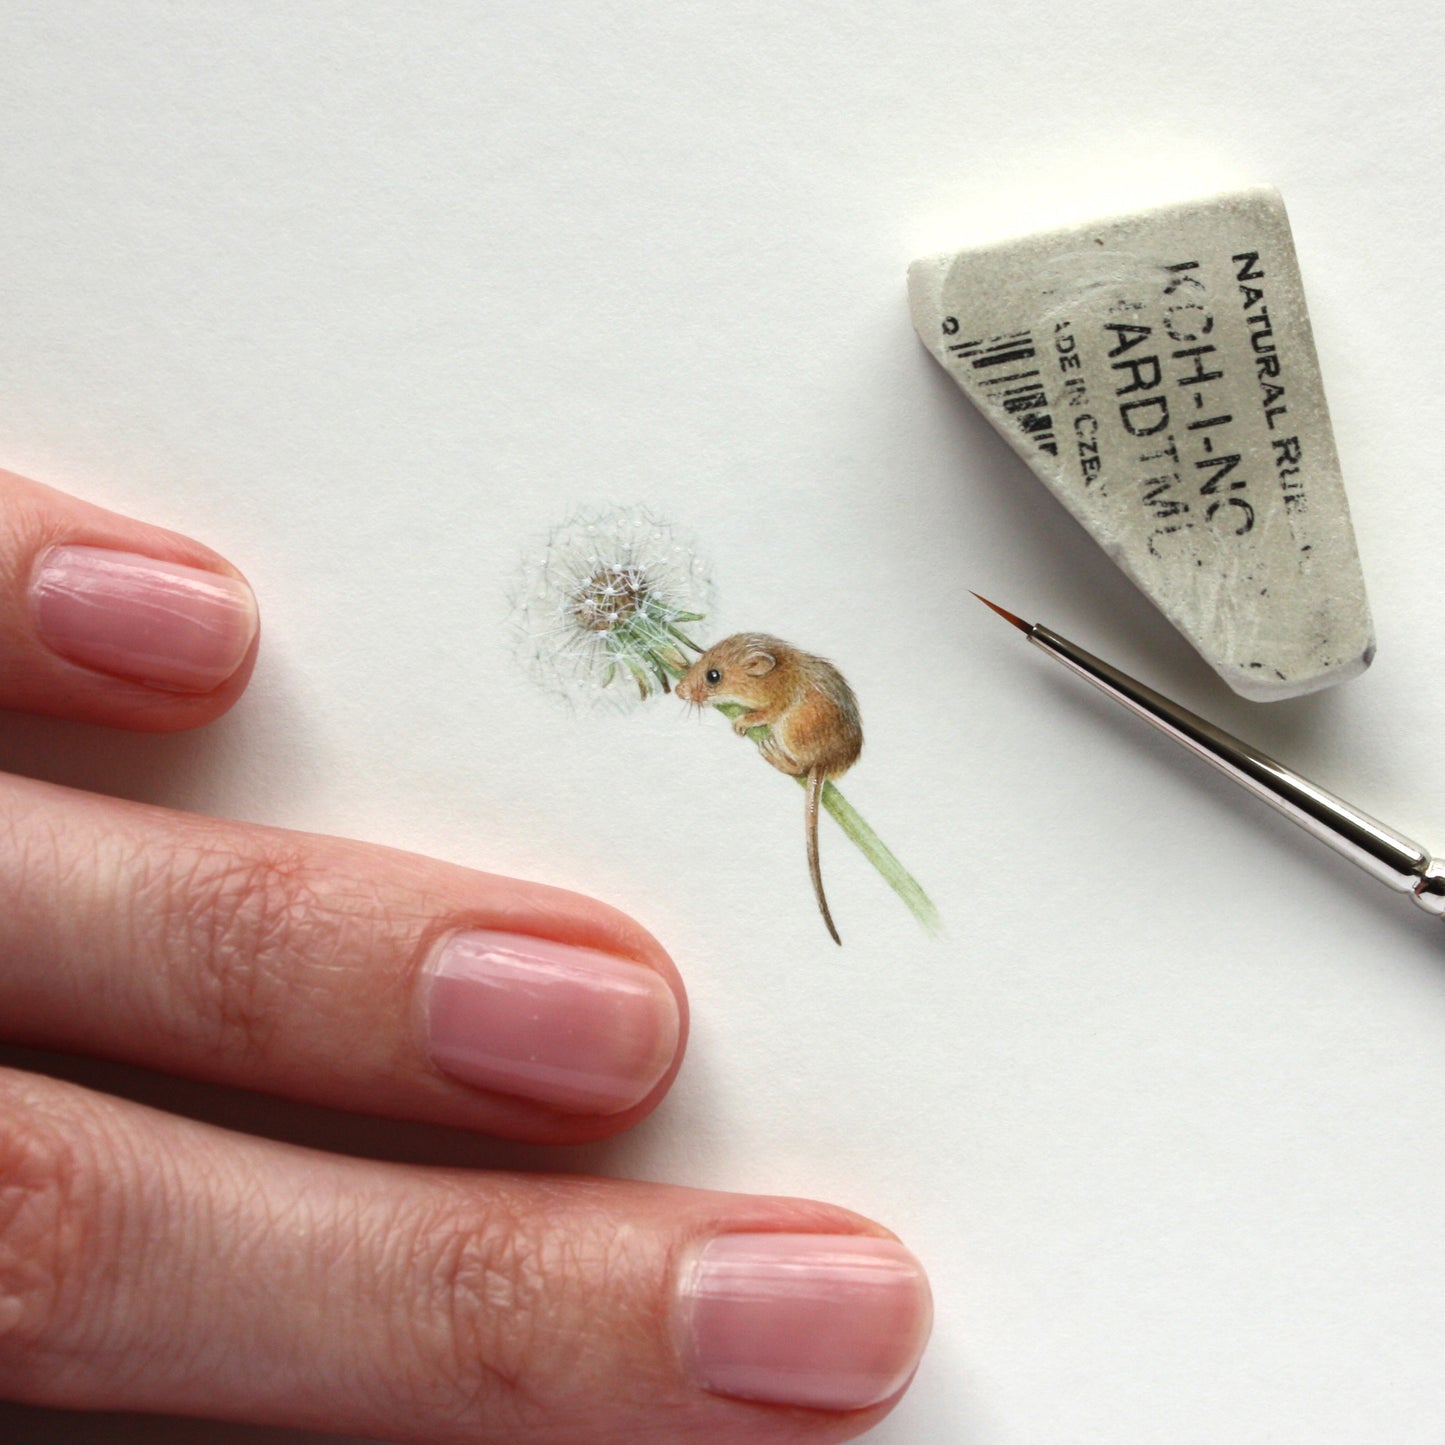 PRINT of watercolor miniature painting. Mouse with Dandelion